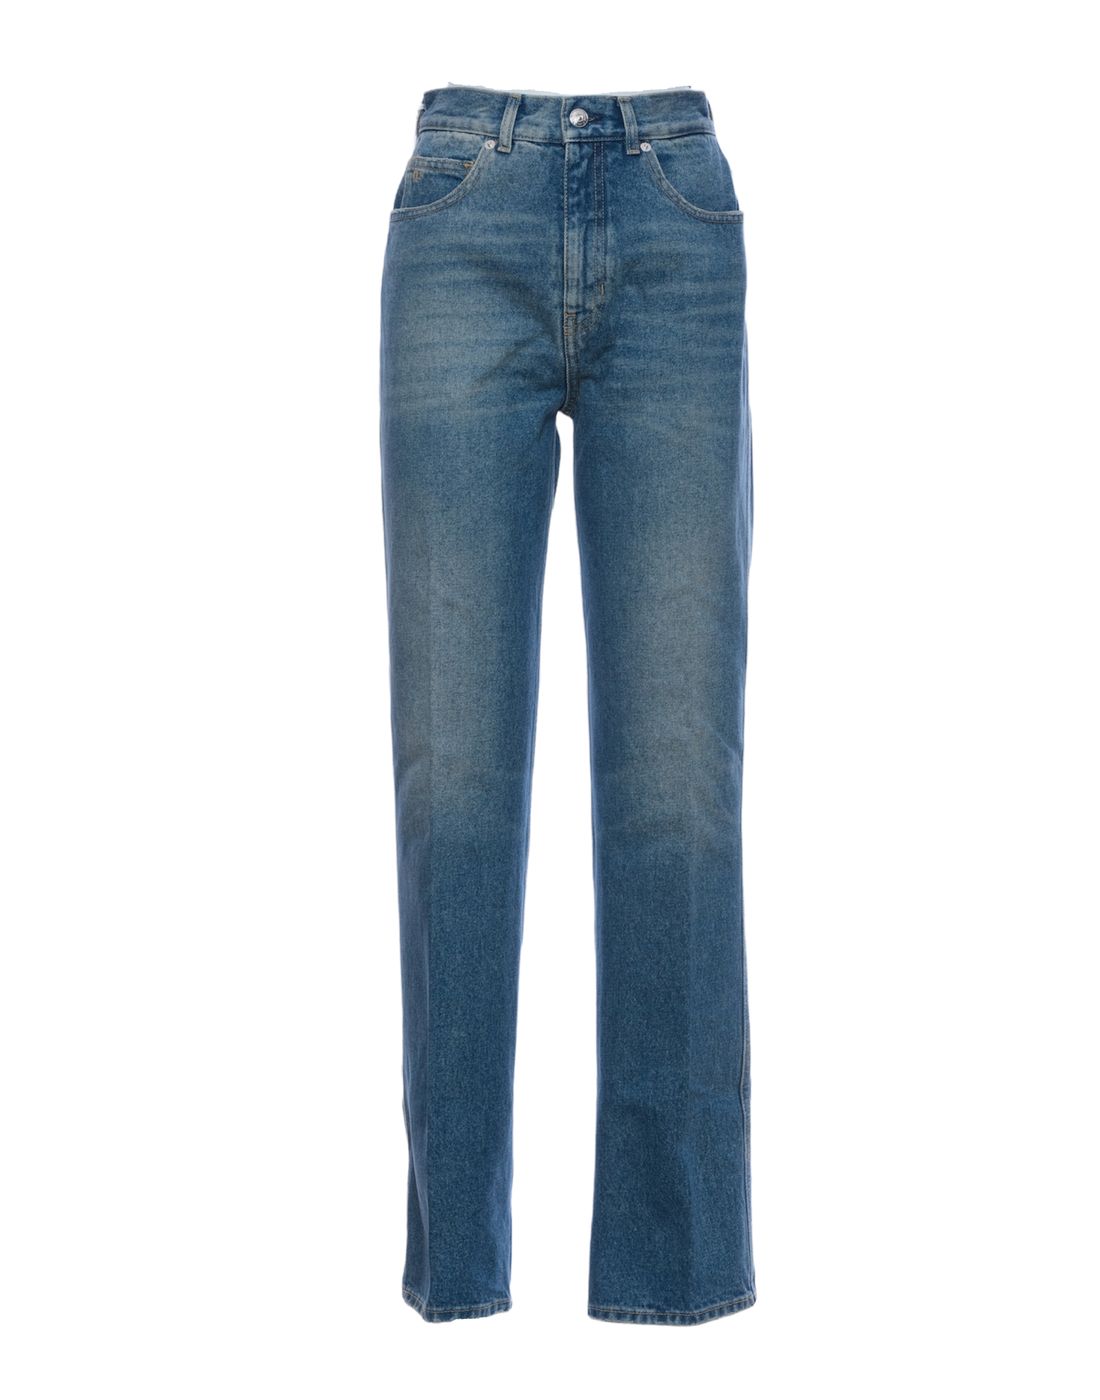 Jeans pour la femme Ale01 Alessandra GG342 NINE IN THE MORNING